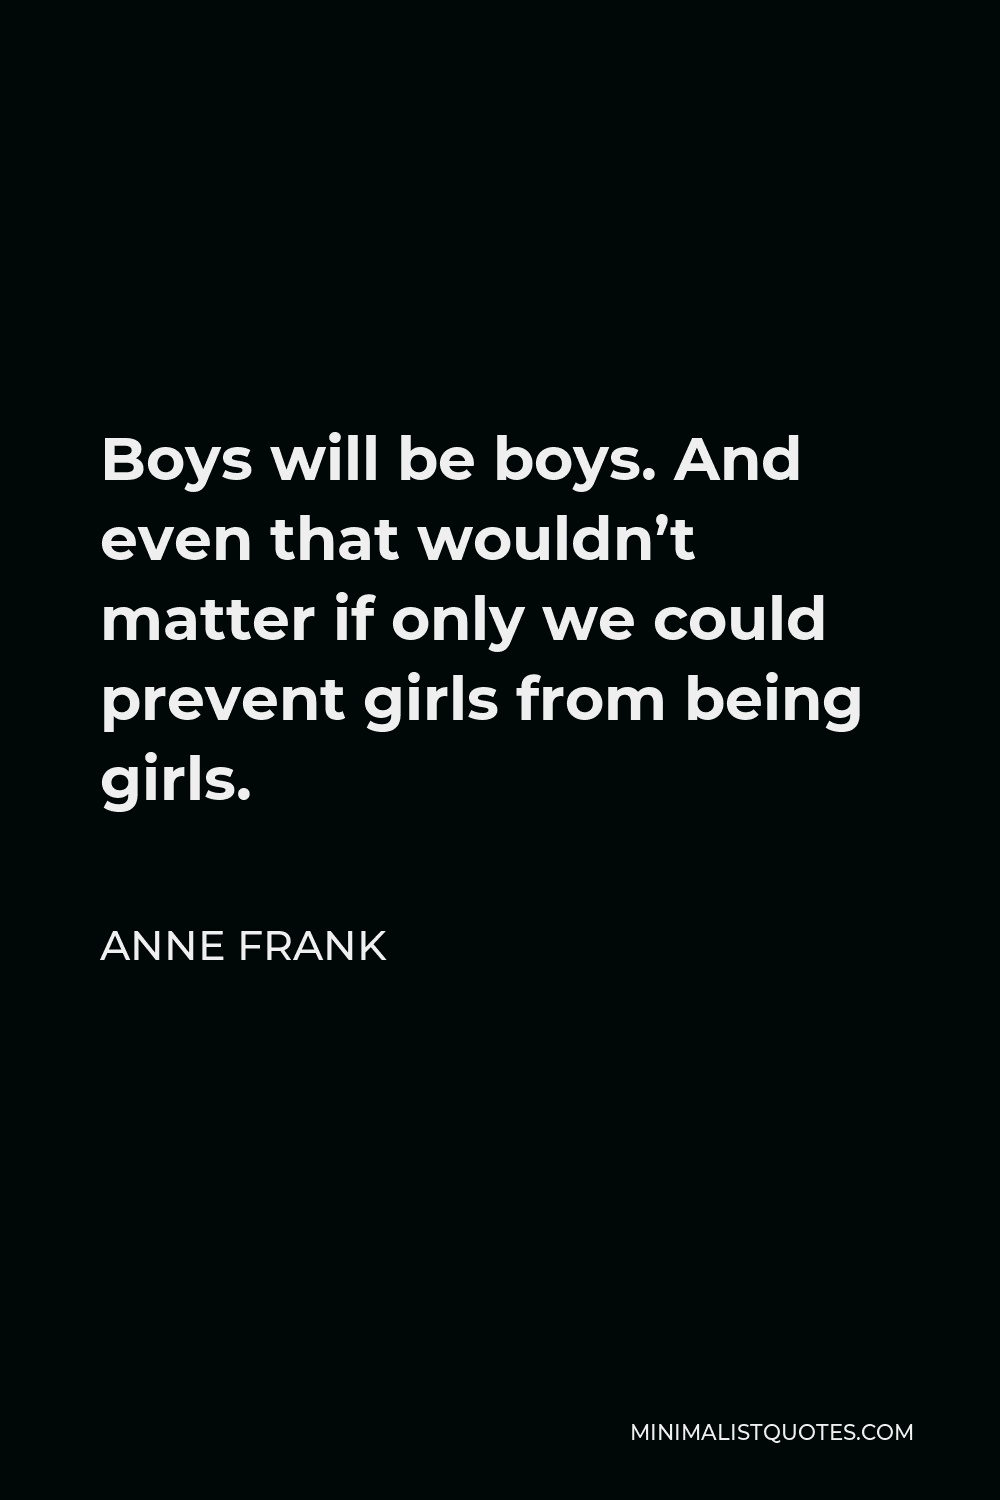 Anne Frank Quote: Boys Will Be Boys. And Even That Wouldn't Matter If Only We Could Prevent Girls From Being Girls.